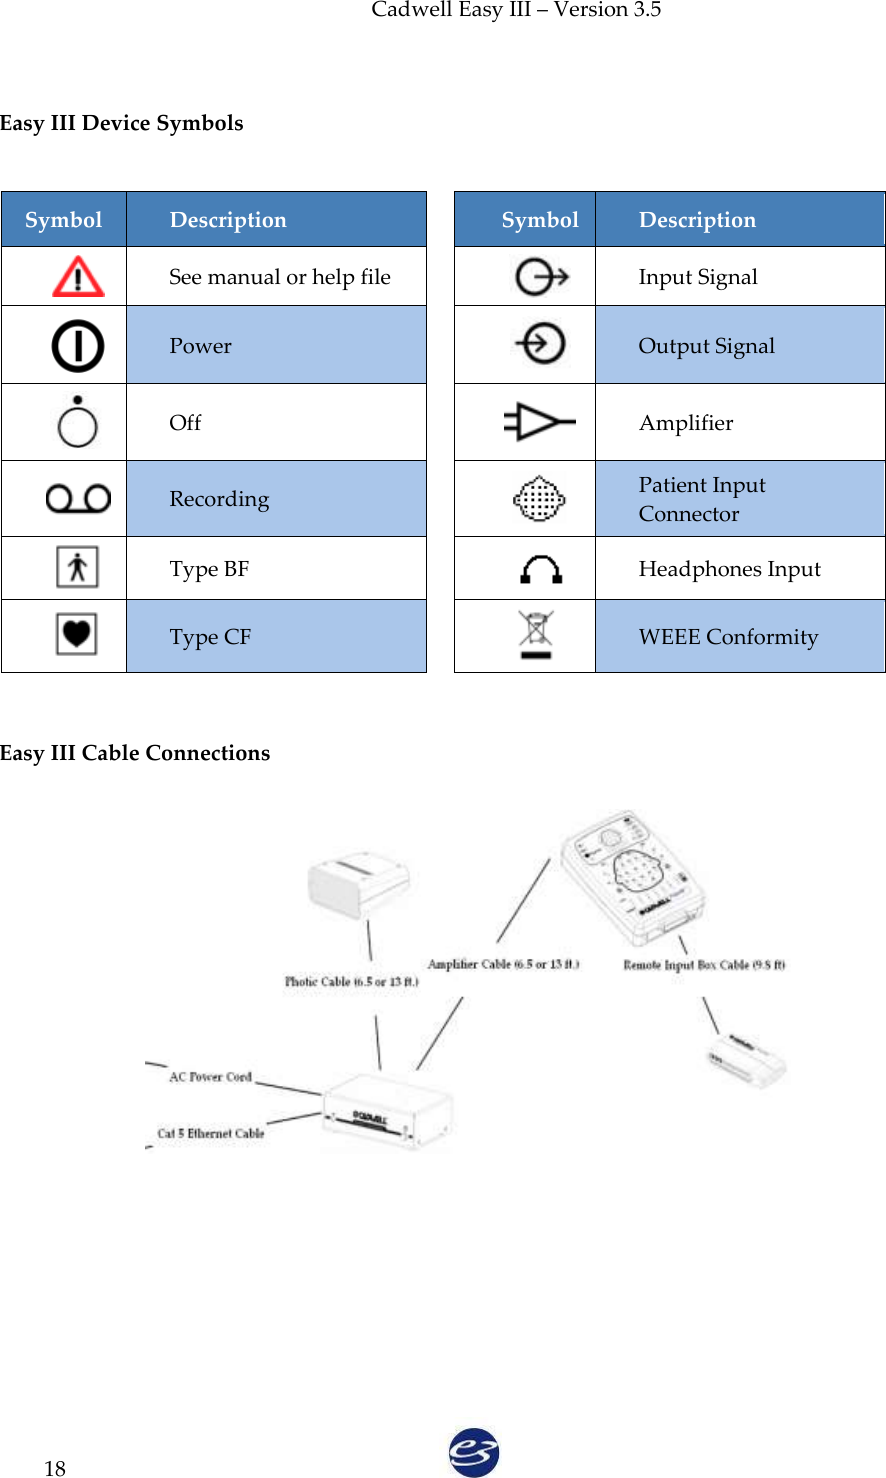 Cadwell Easy III – Version 3.5   18  Easy III Device Symbols   Symbol Description  Symbol Description  See manual or help file   Input Signal  Power   Output Signal  Off   Amplifier  Recording   Patient Input Connector  Type BF   Headphones Input  Type CF   WEEE Conformity  Easy III Cable Connections             